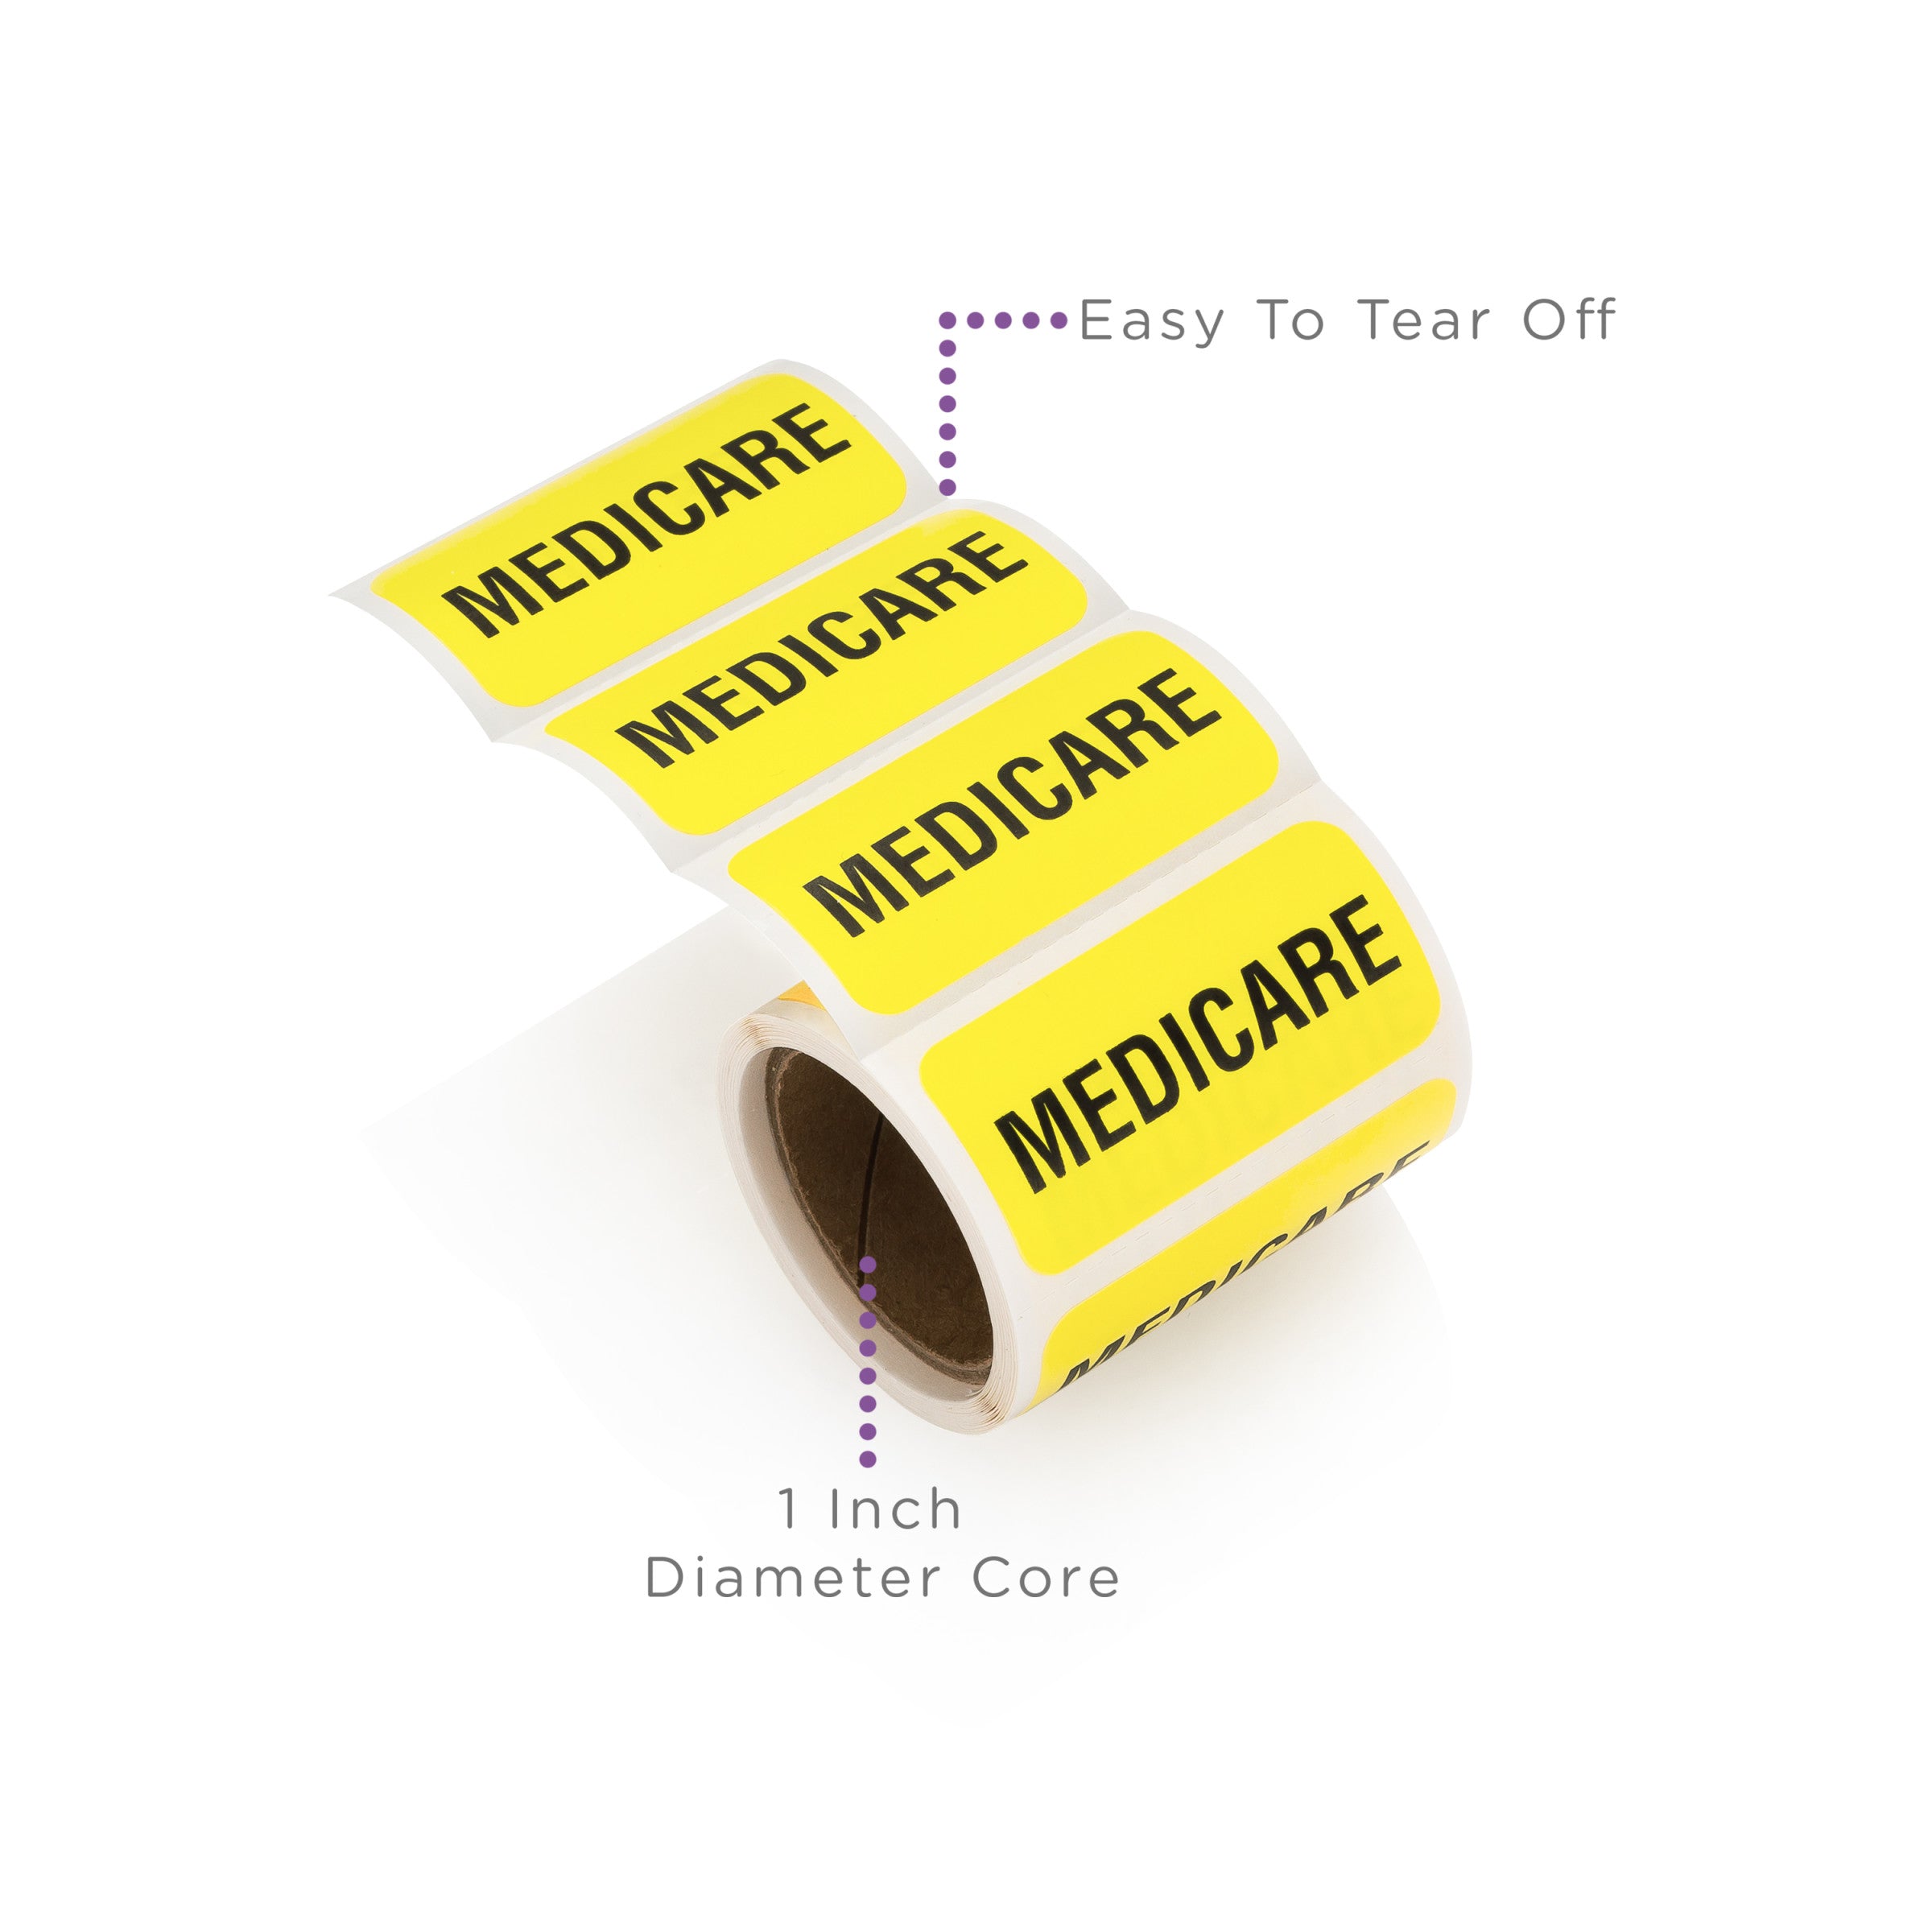 Medicare Alert and Instruction Labels, Yellow, W1.5" x H.75" (Roll of 100)